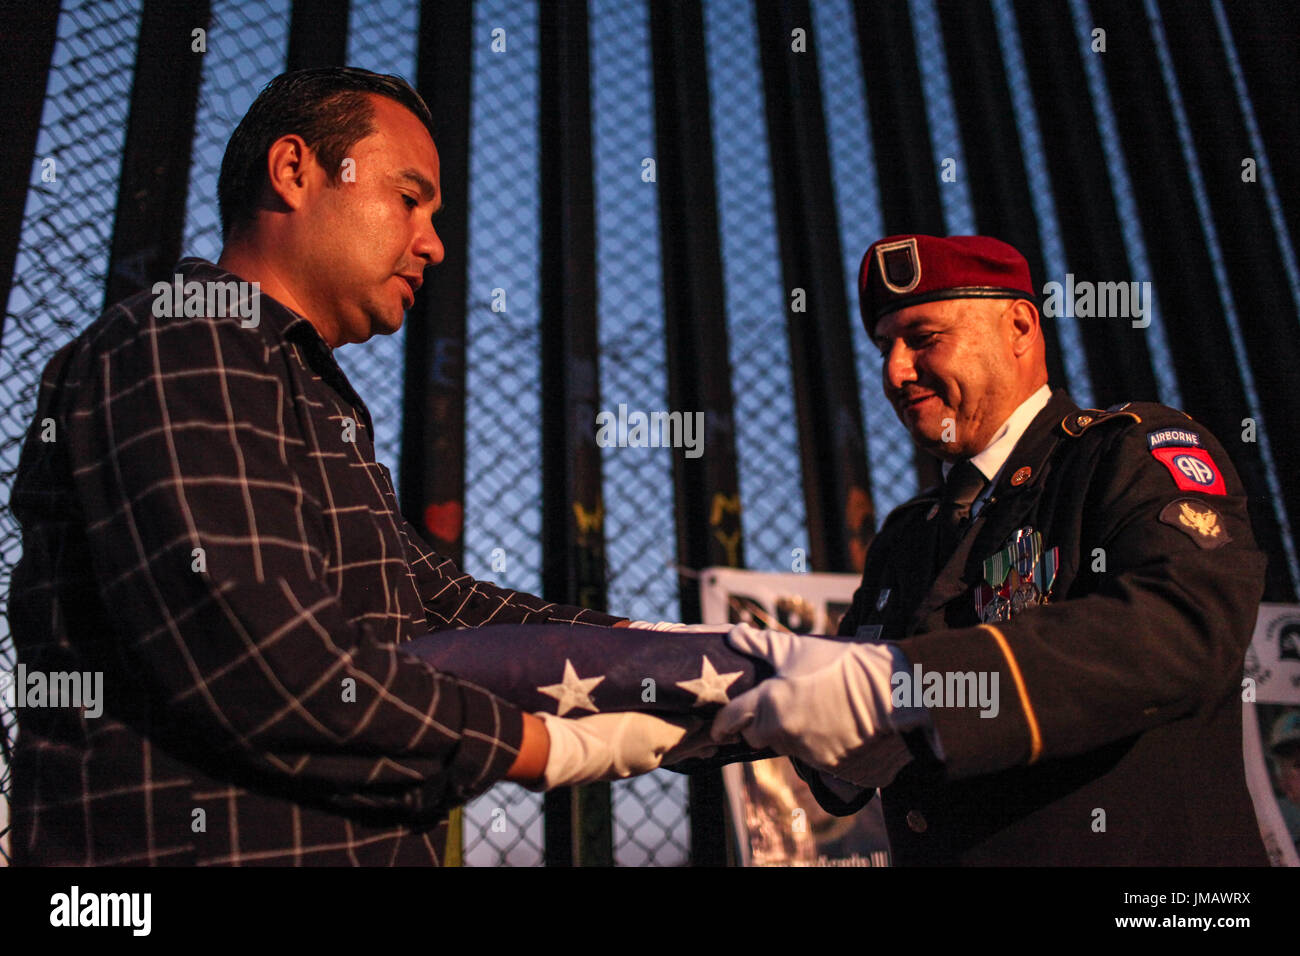 Tijuana, Baja California, Mexico. 4th July, 2017. EDWIN SALGADO (L), a deported U.S. Marine Corps veteran, and HECTOR BARAJAS-VARELA (R), a deported U.S. Army veteran, fold an American flag during a 4th of July celebration along the US-Mexico border in Tijuana, Baja California, Mexico. Credit: Joel Angel Juarez/ZUMA Wire/Alamy Live News Stock Photo